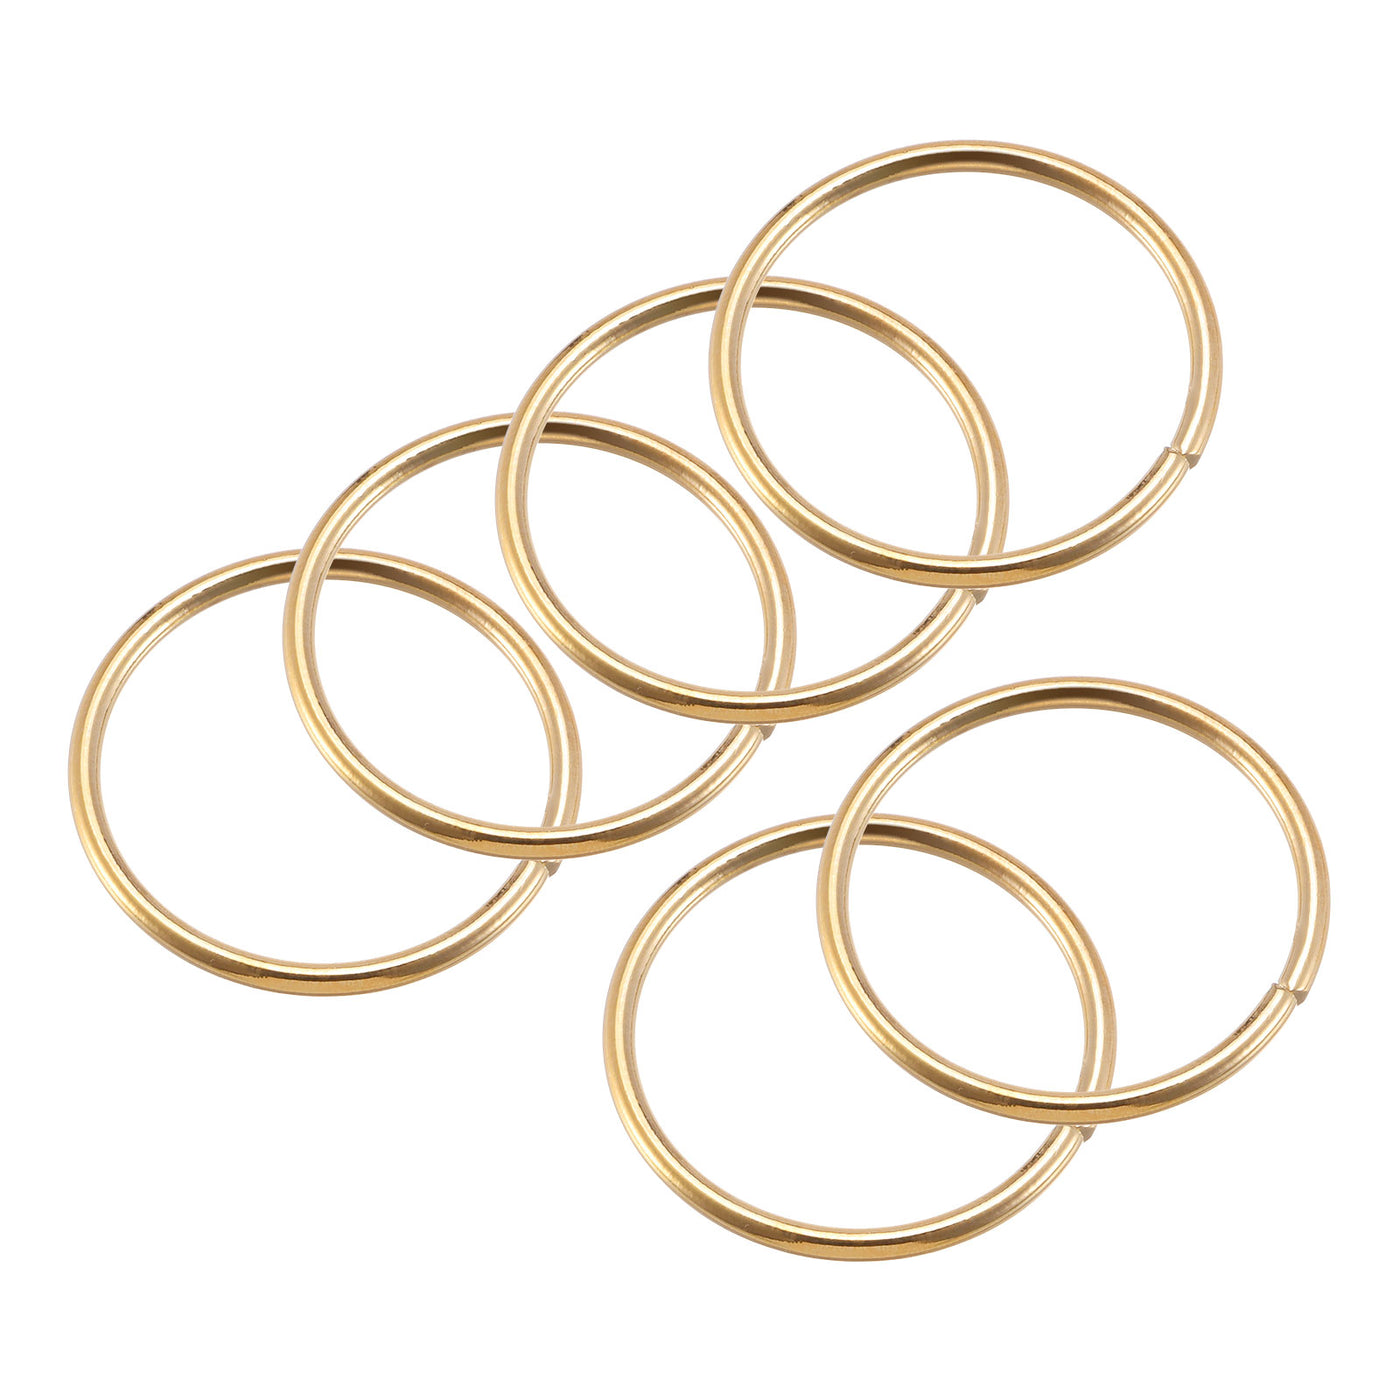 uxcell Uxcell 45mm(1.77") OD Metal O Ring Non-Welded Craft Hoops for DIY Gold Tone 25pcs